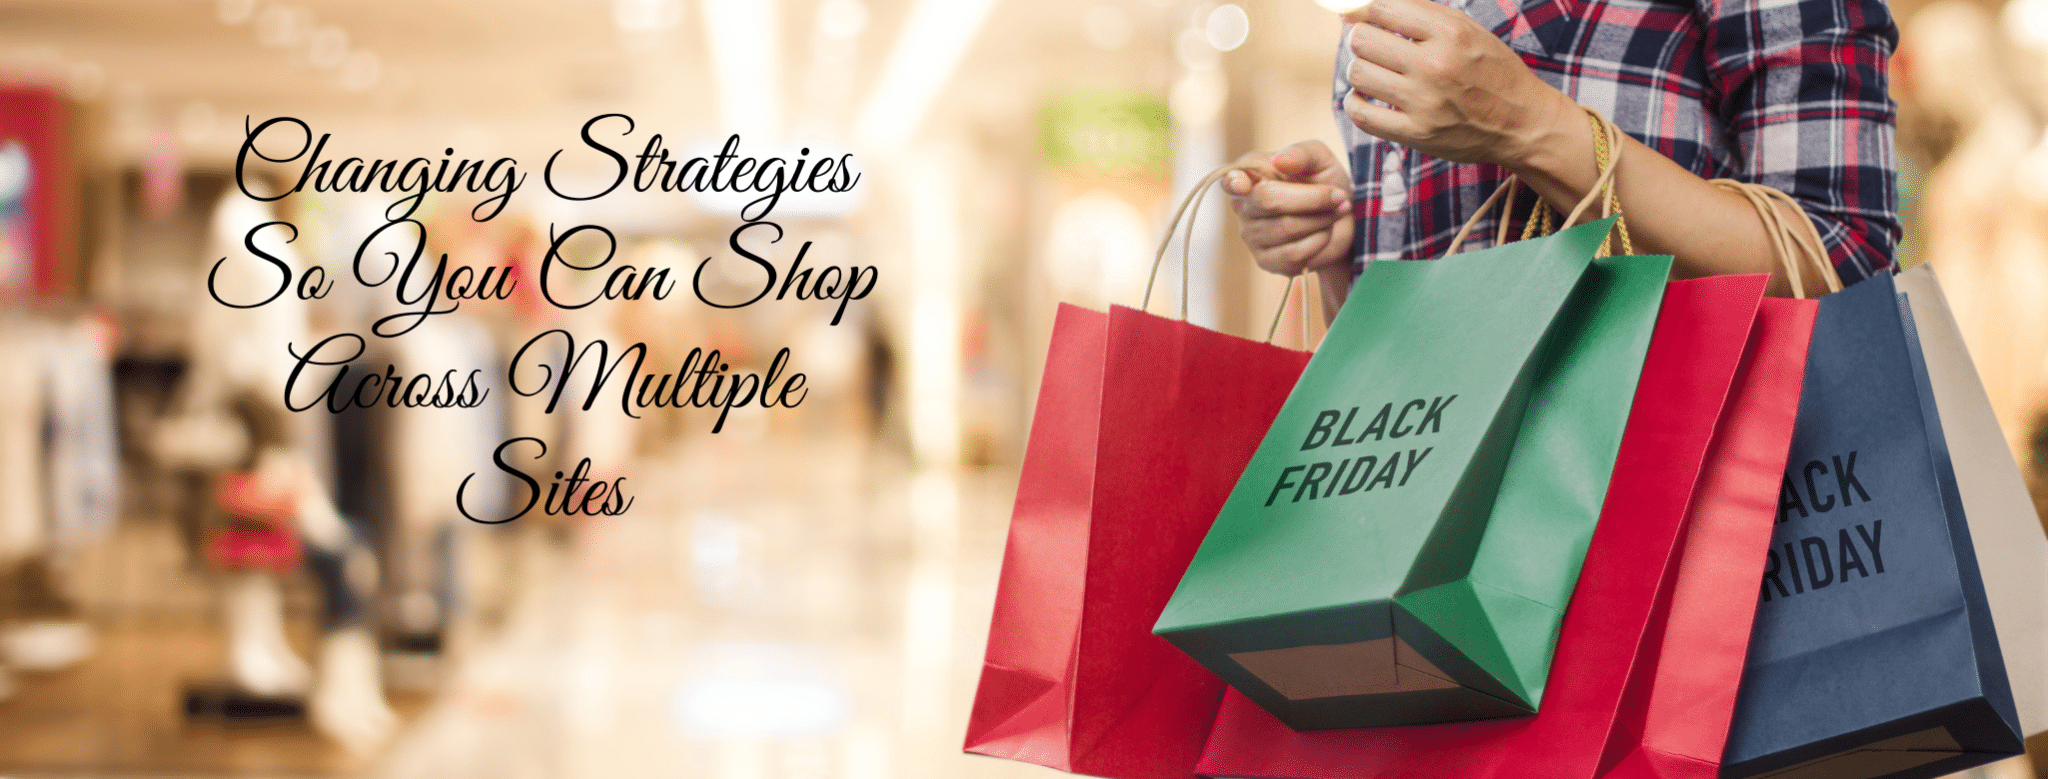 Changing Strategies So You Can Shop Across Multiple Sites